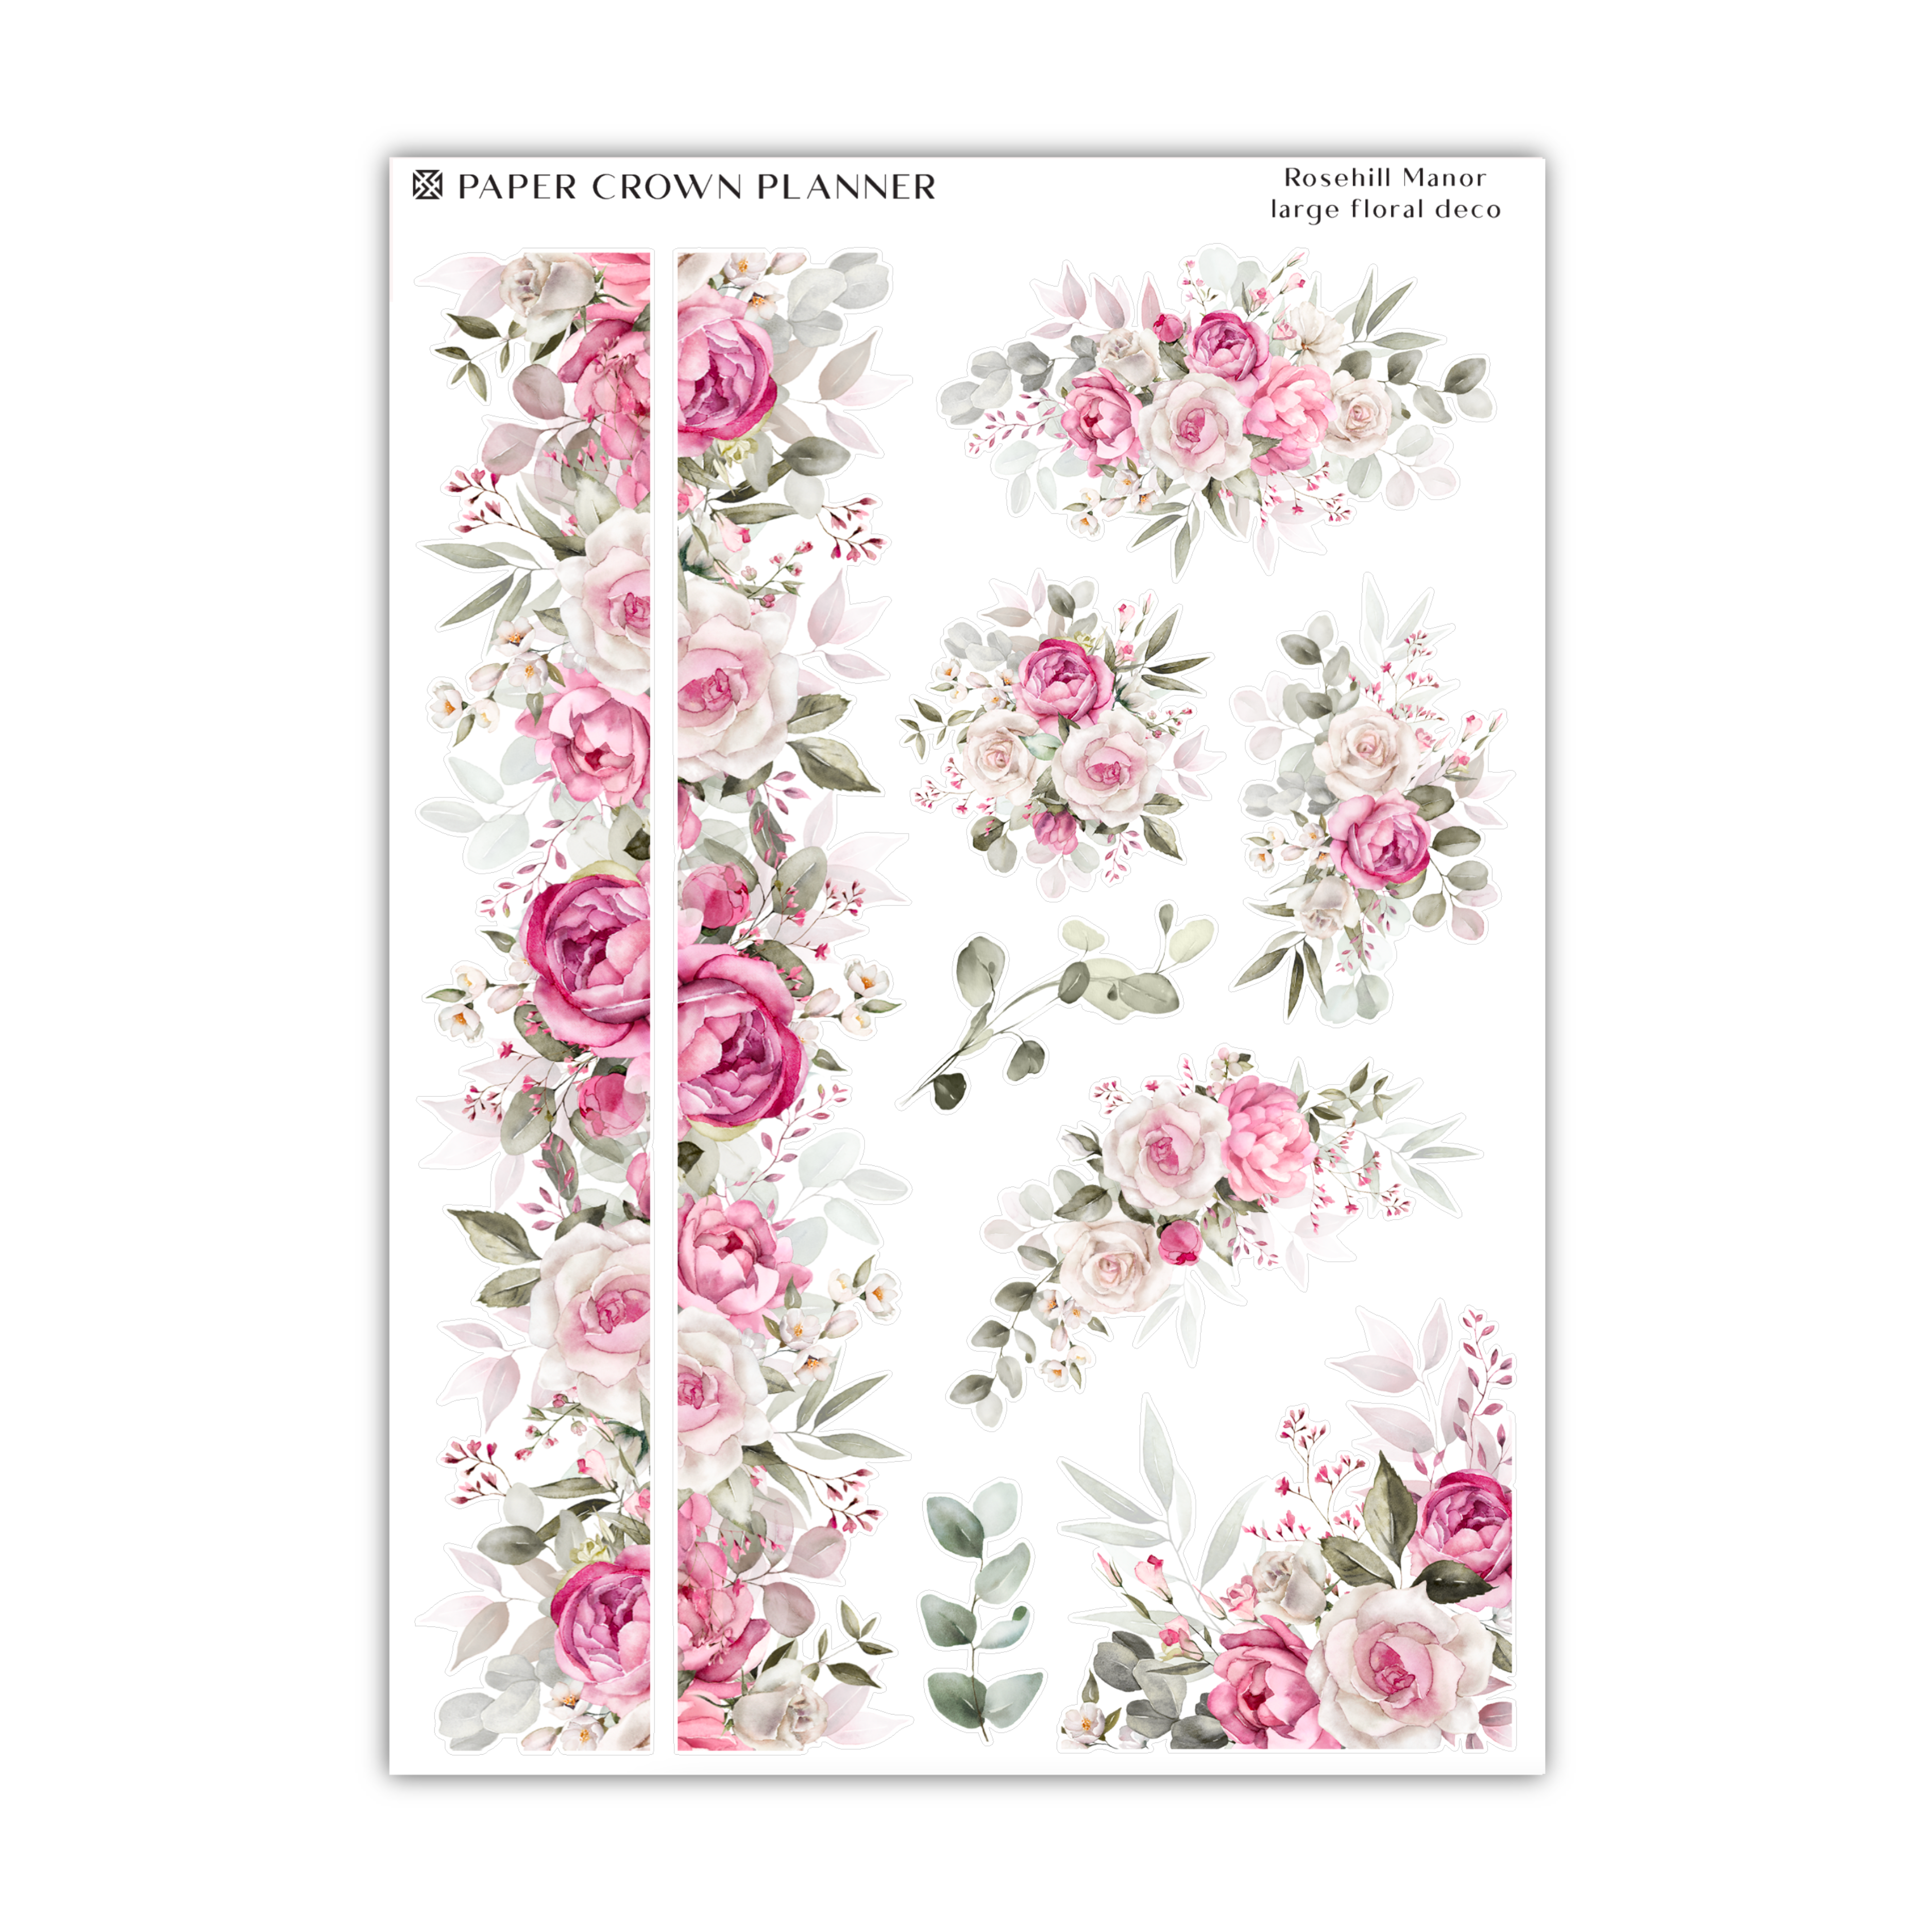 the paper crown planner with pink flowers and leaves